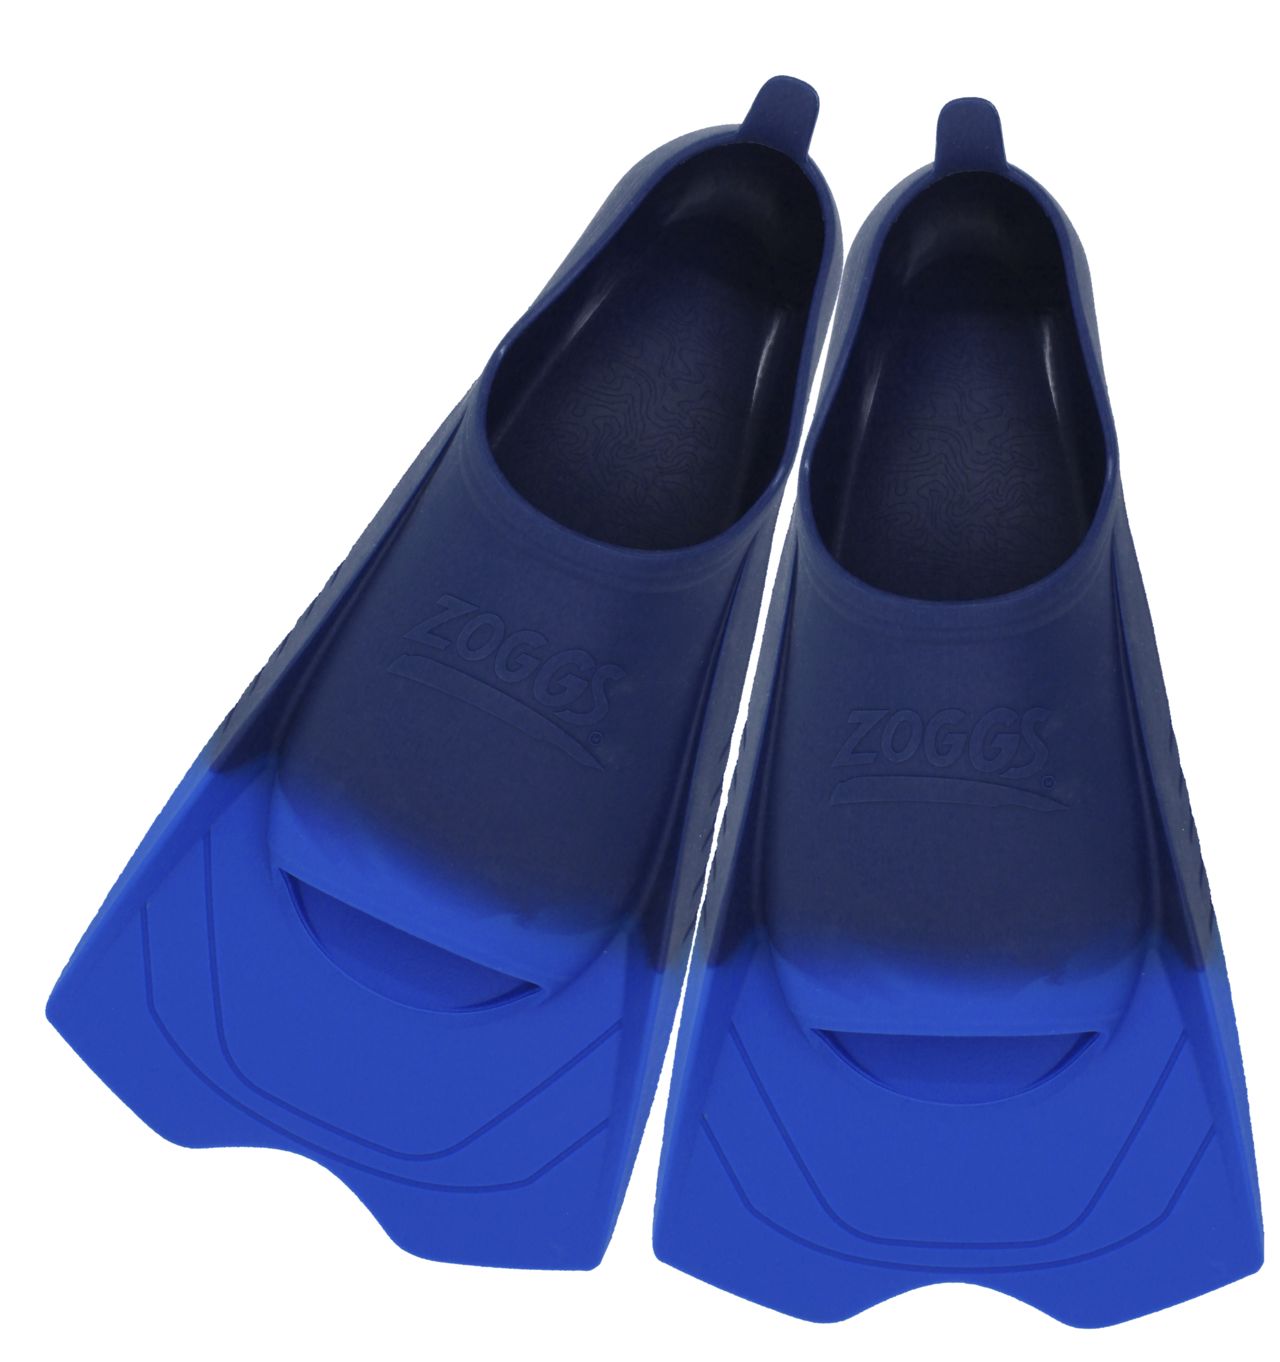 Zoggs Ultra Blue Short Fins | Sporty's Warehouse